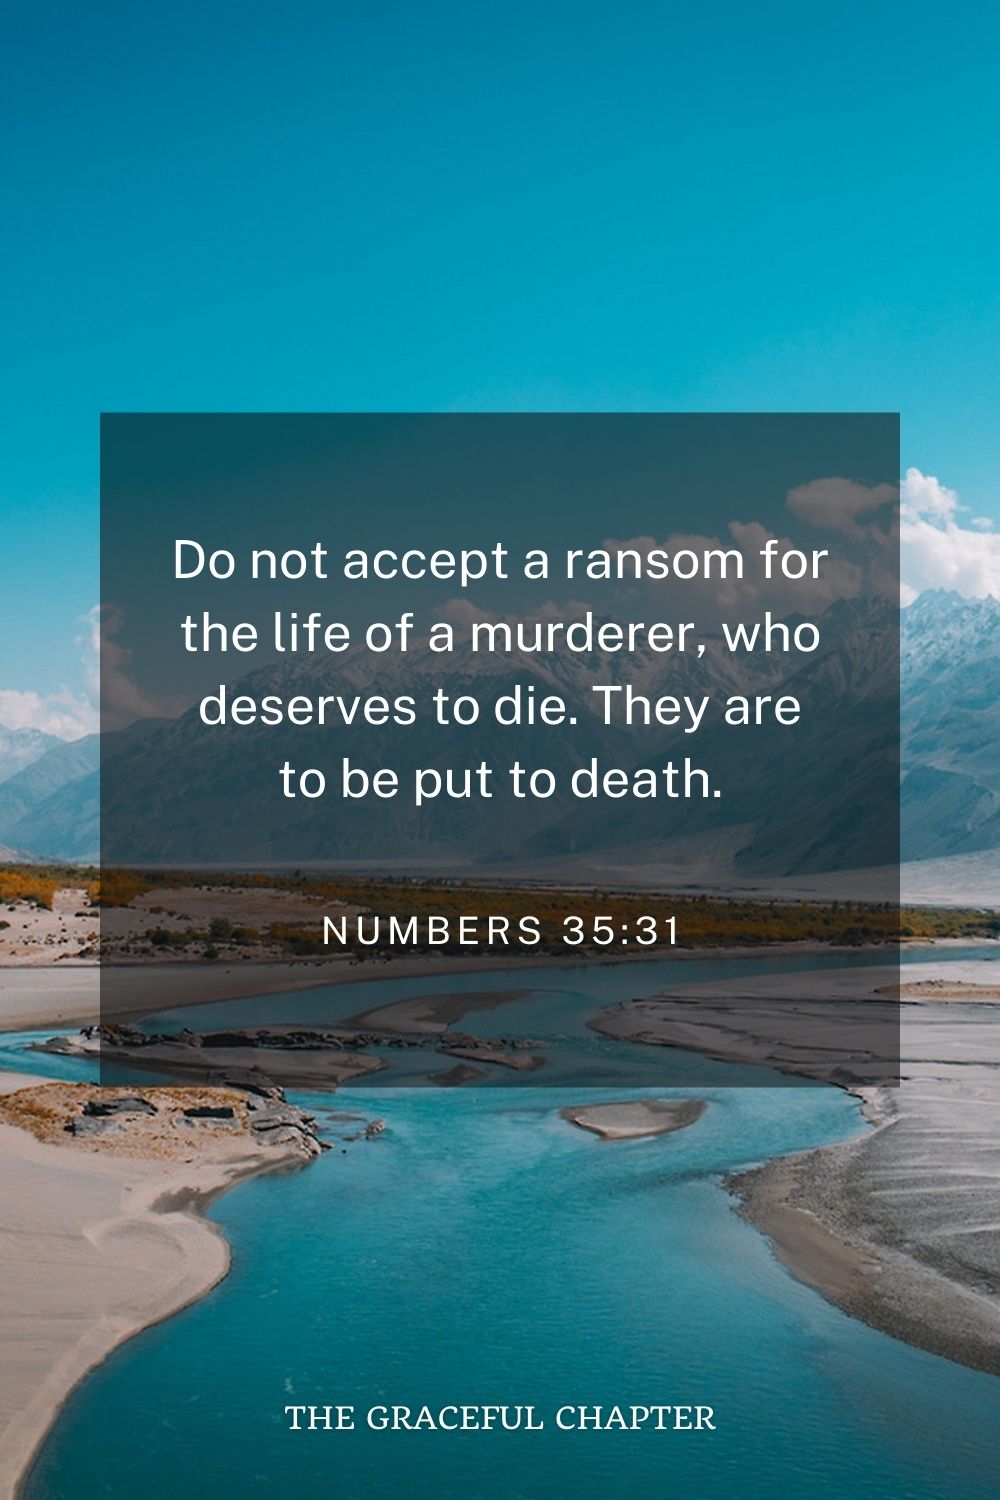 Do not accept a ransom for the life of a murderer, who deserves to die. They are to be put to death. Numbers 35:31